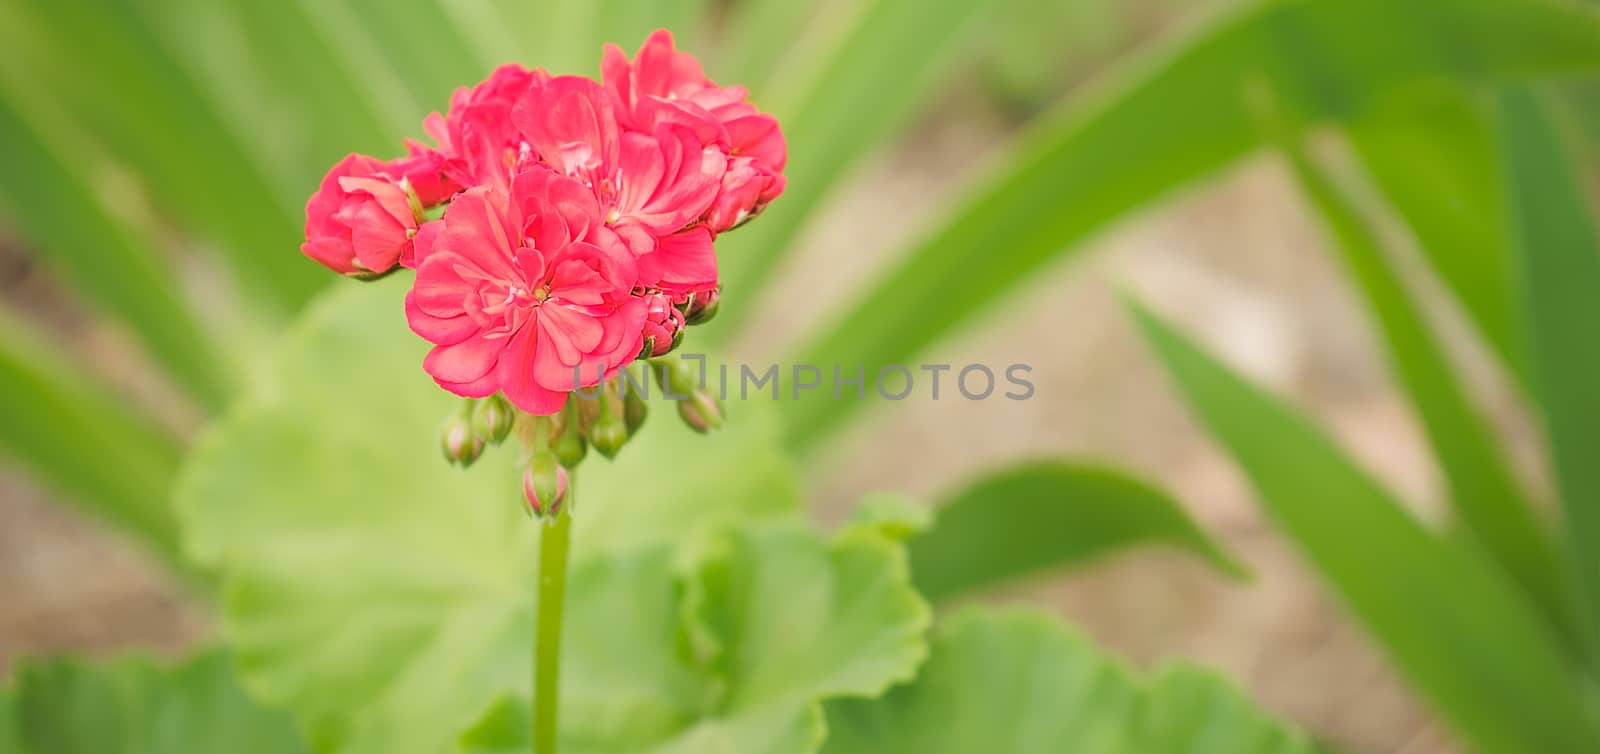 Spring flowers pink geranium with green foliage background